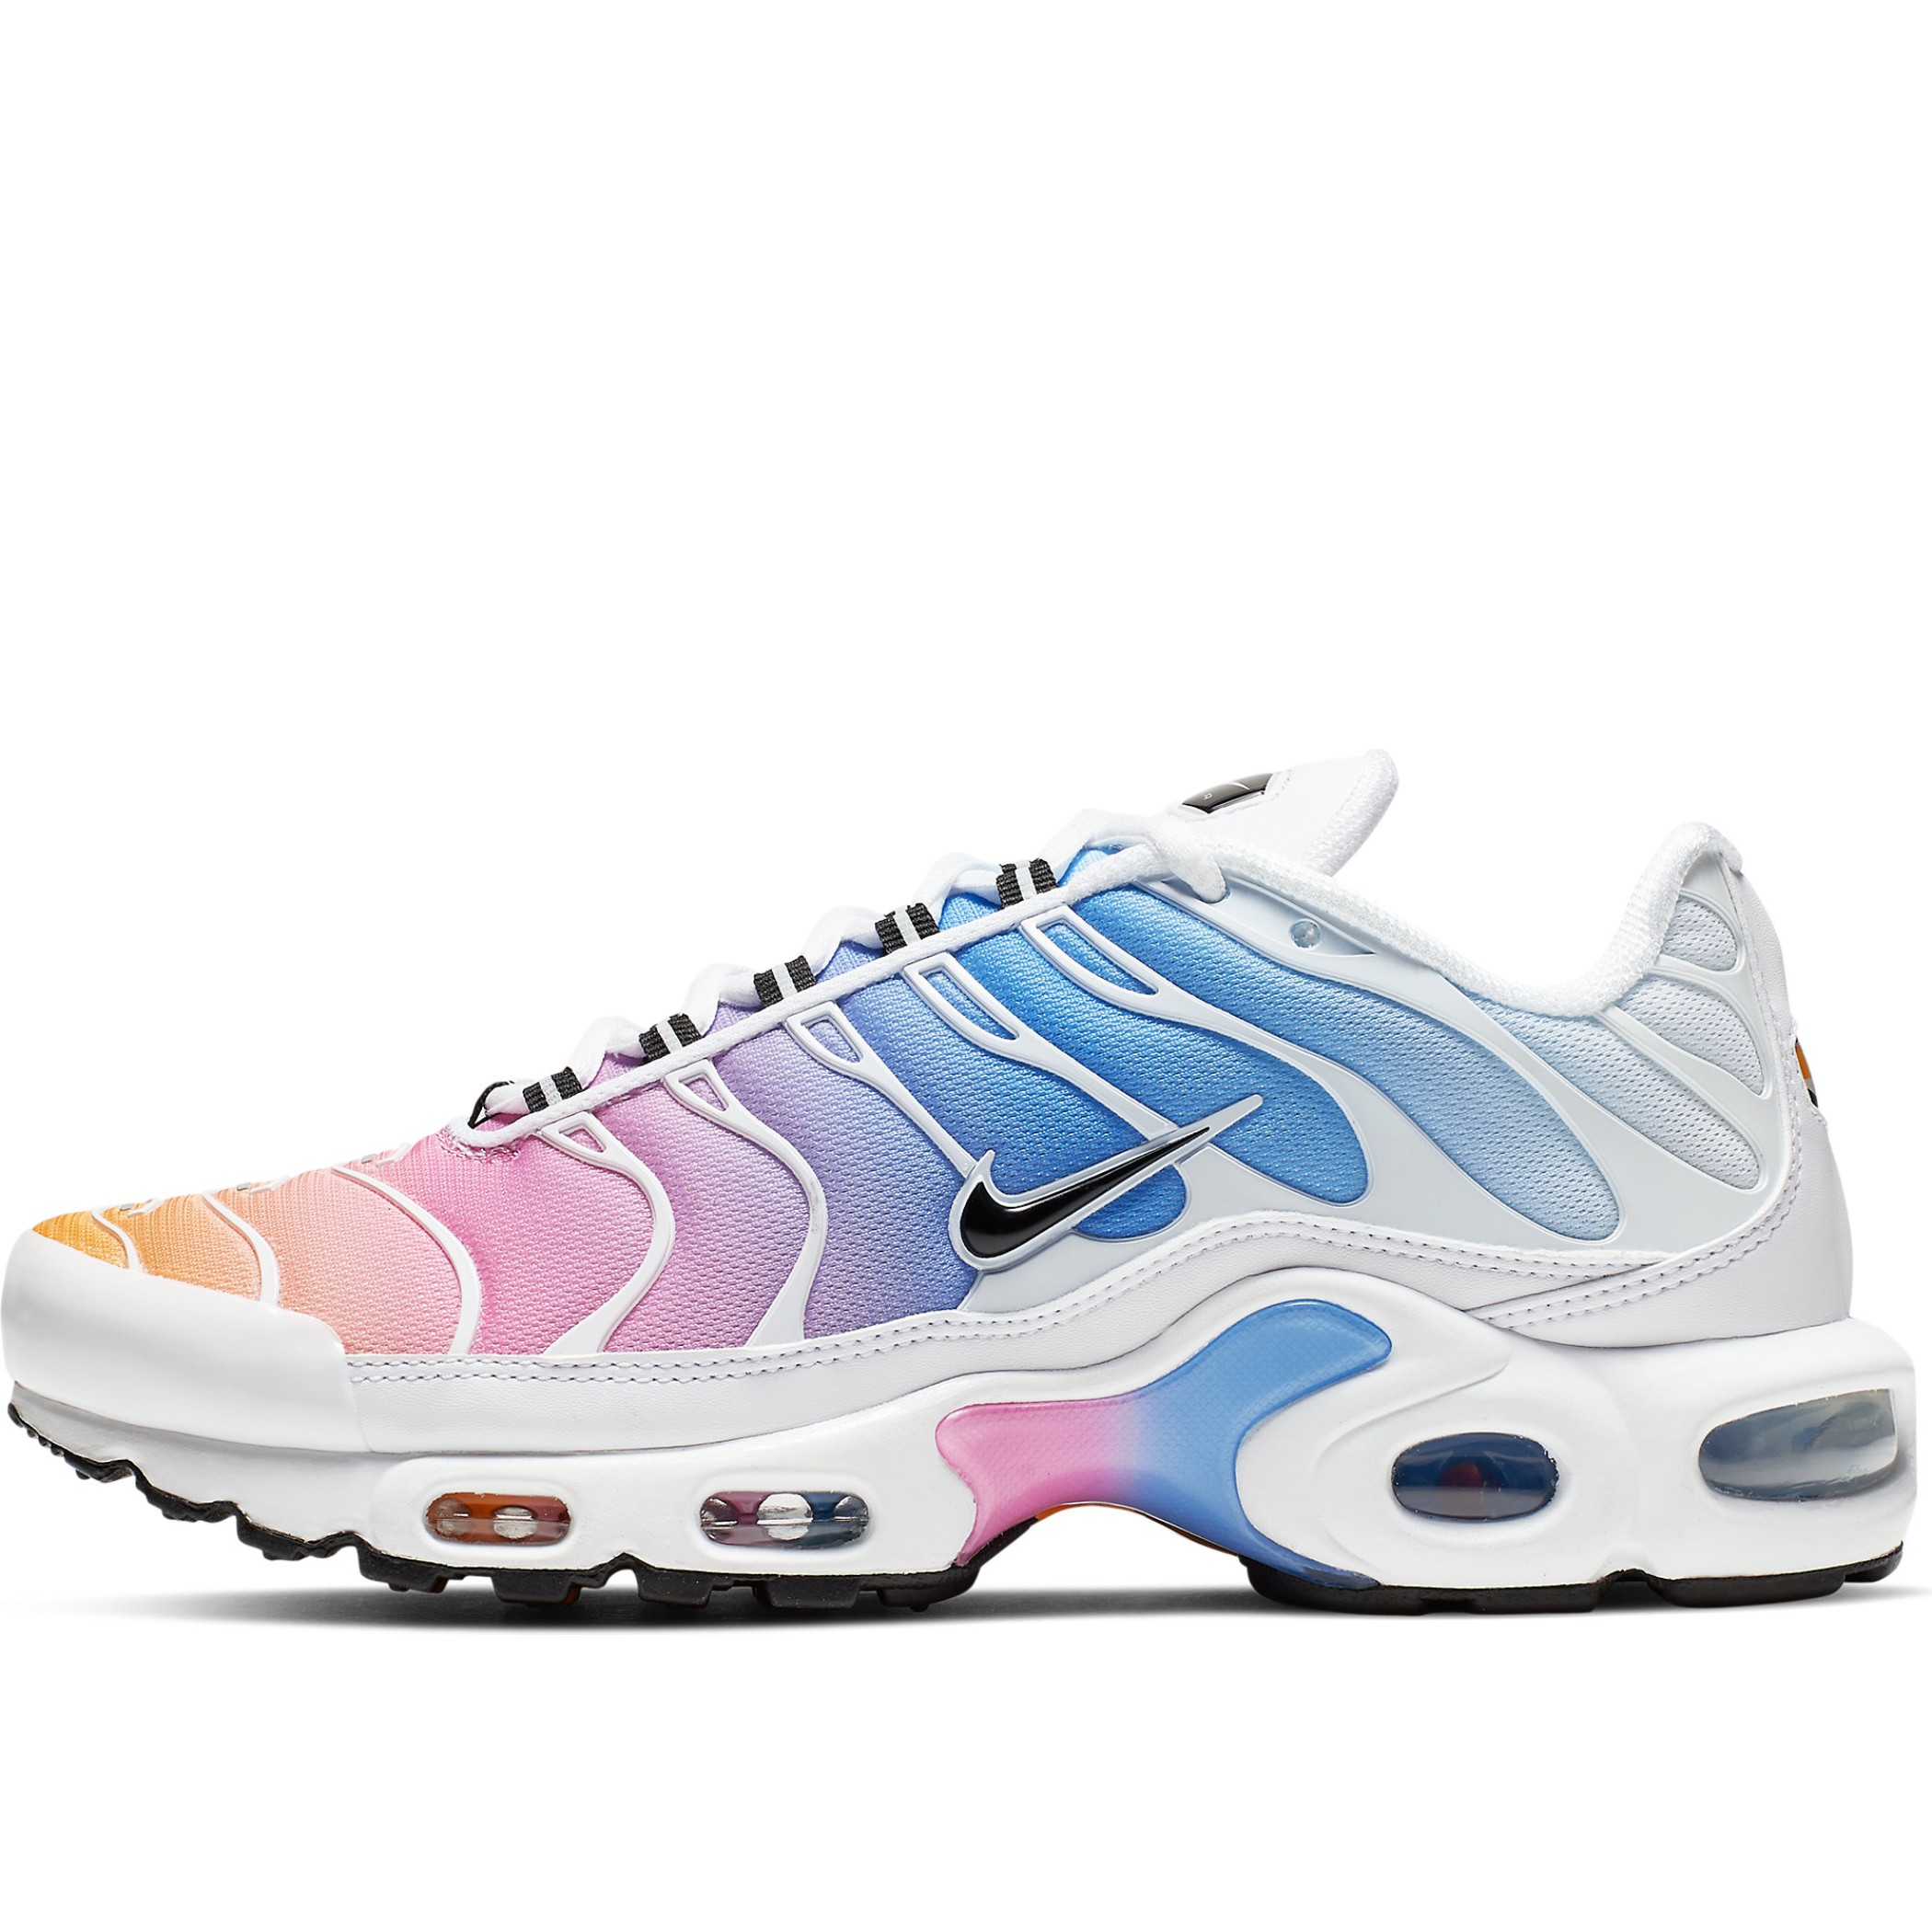 air max plus pink and white